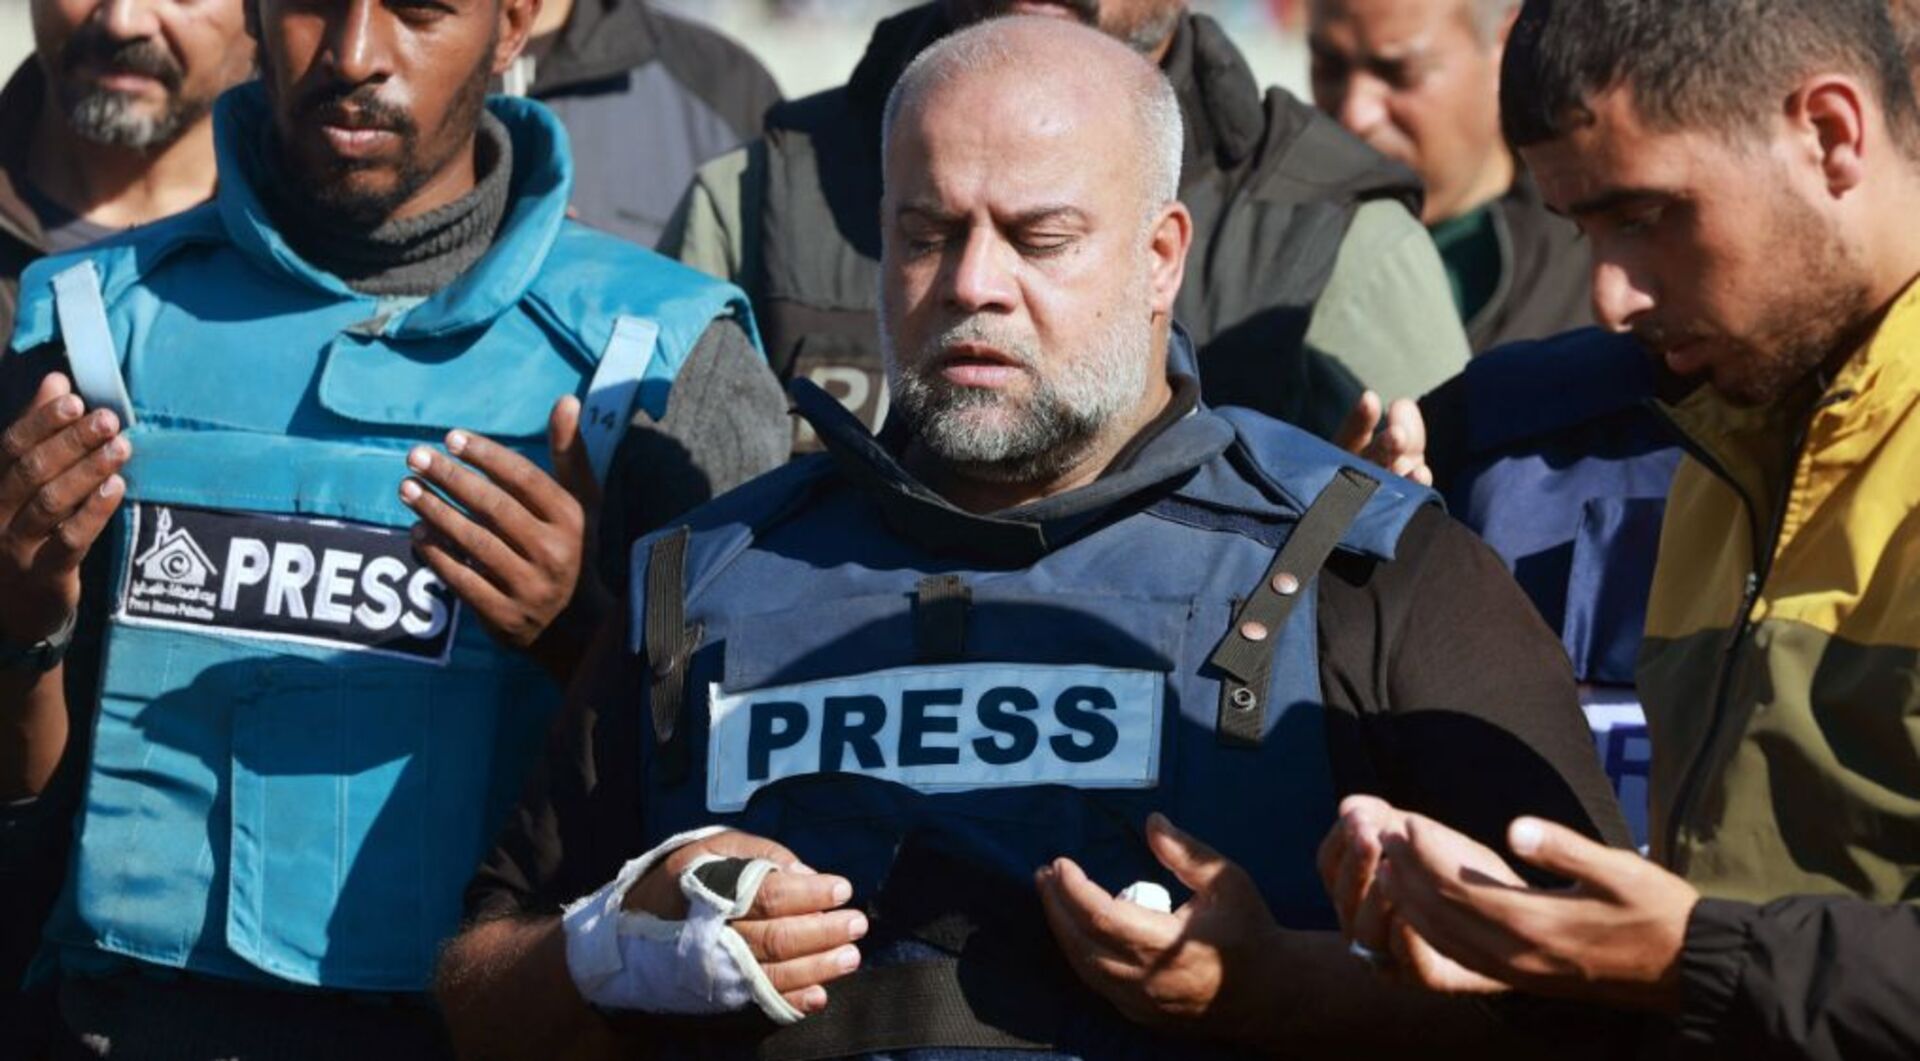 What international solidarity exists with journalists under Israeli attack? | Israel War on Gaza News